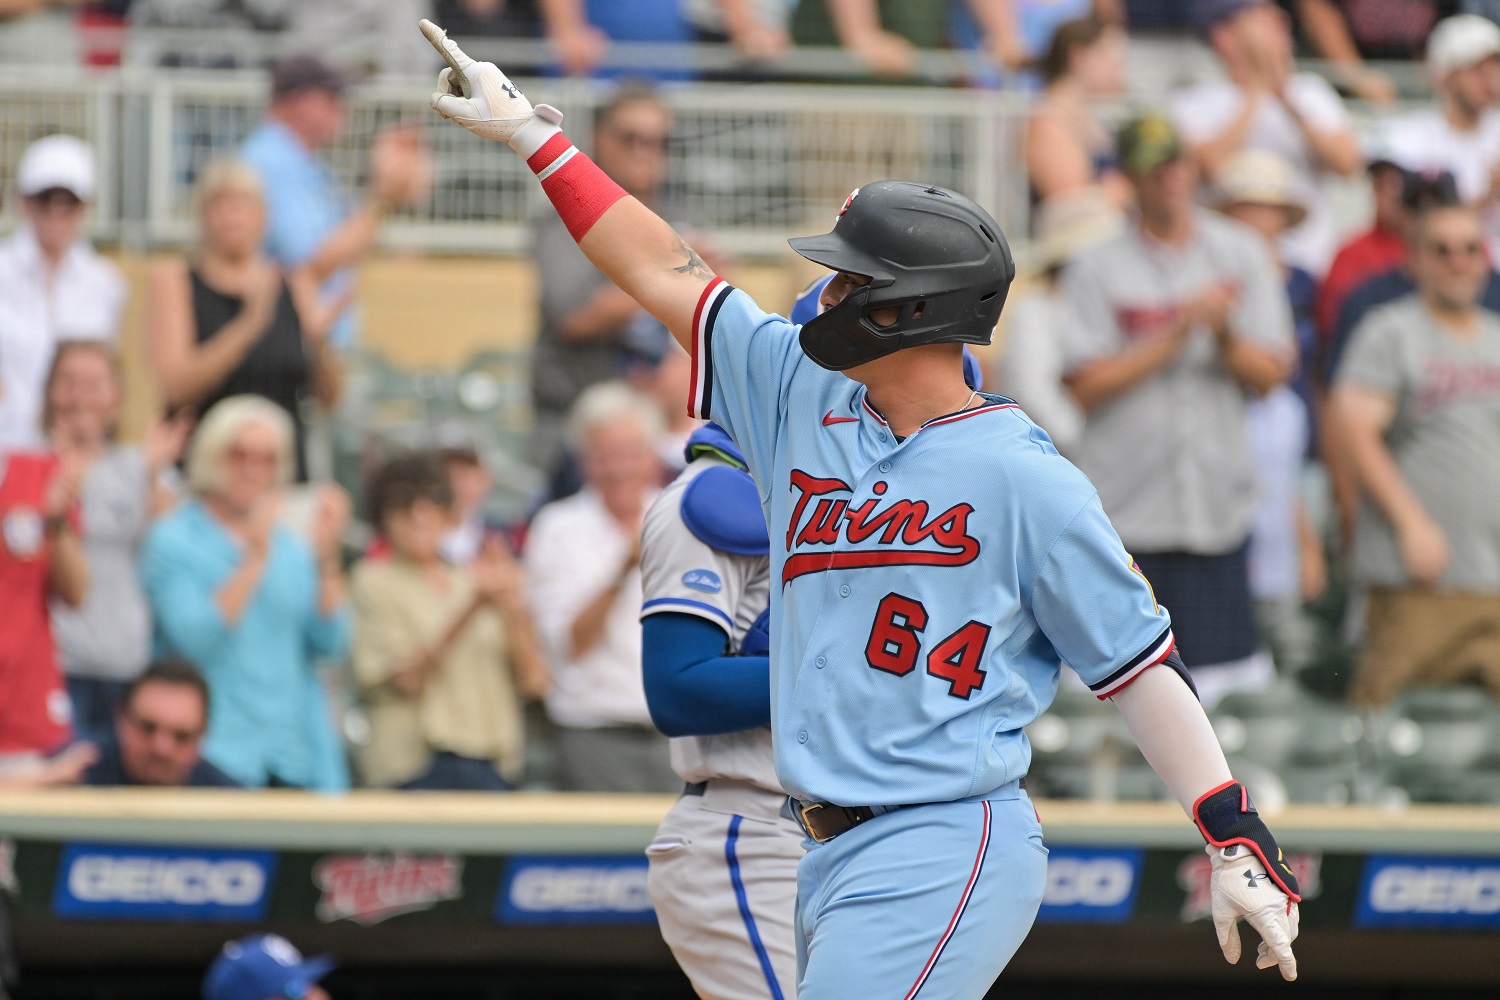 Minnesota Twins: The Eight Greatest Right-Handed Hitters in Twins History